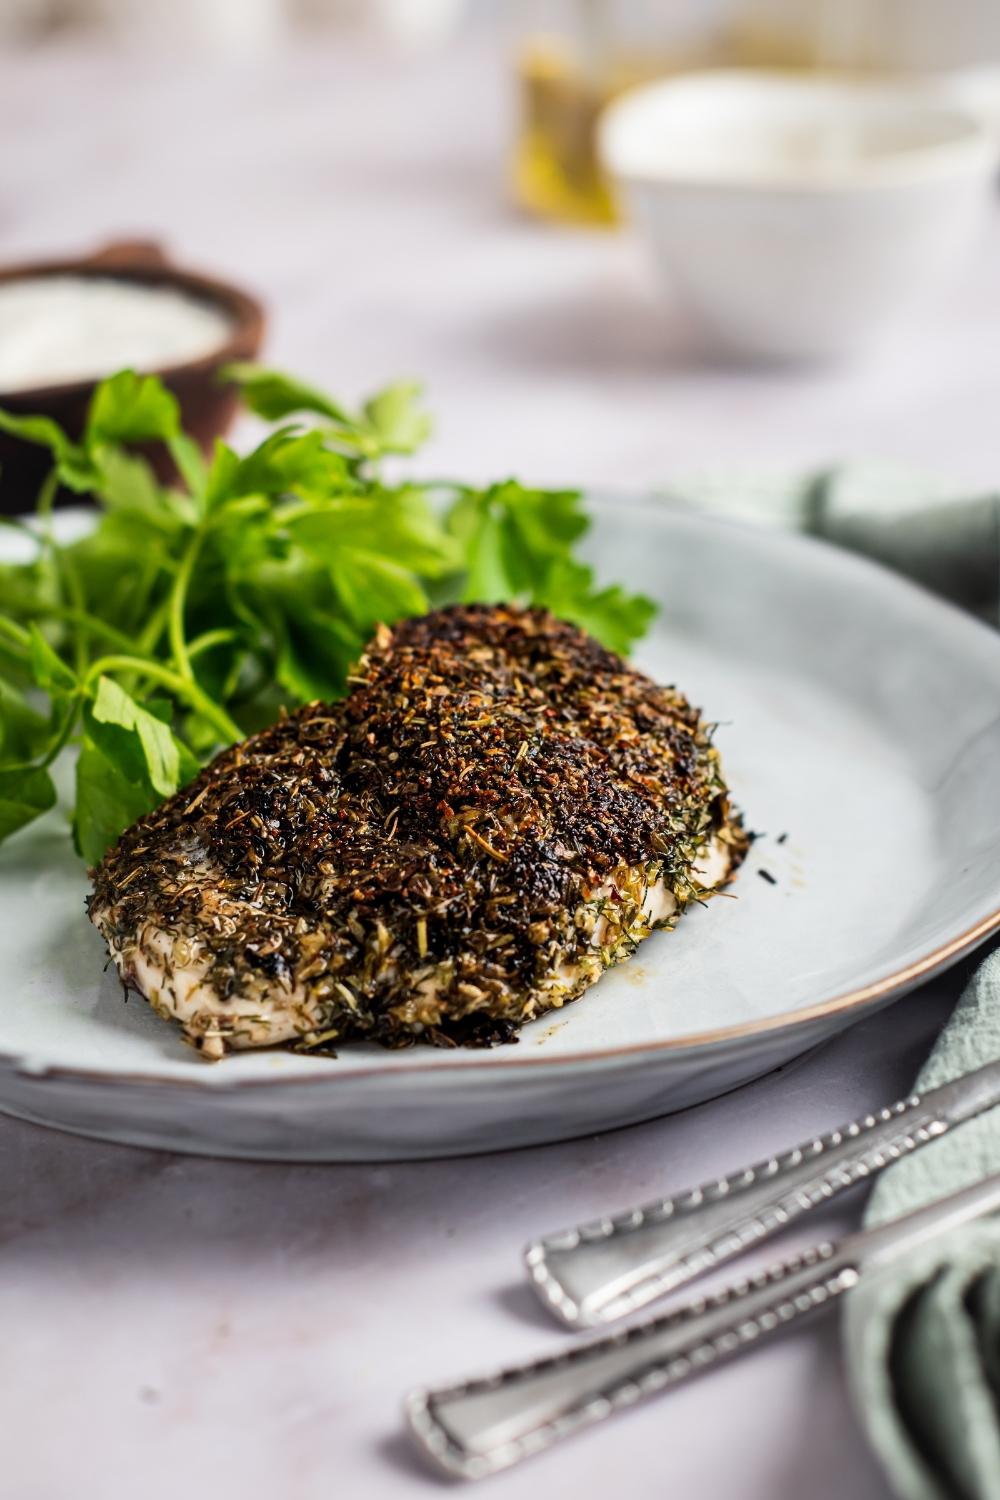 A piece of herb crusted chicken that is on a plate.